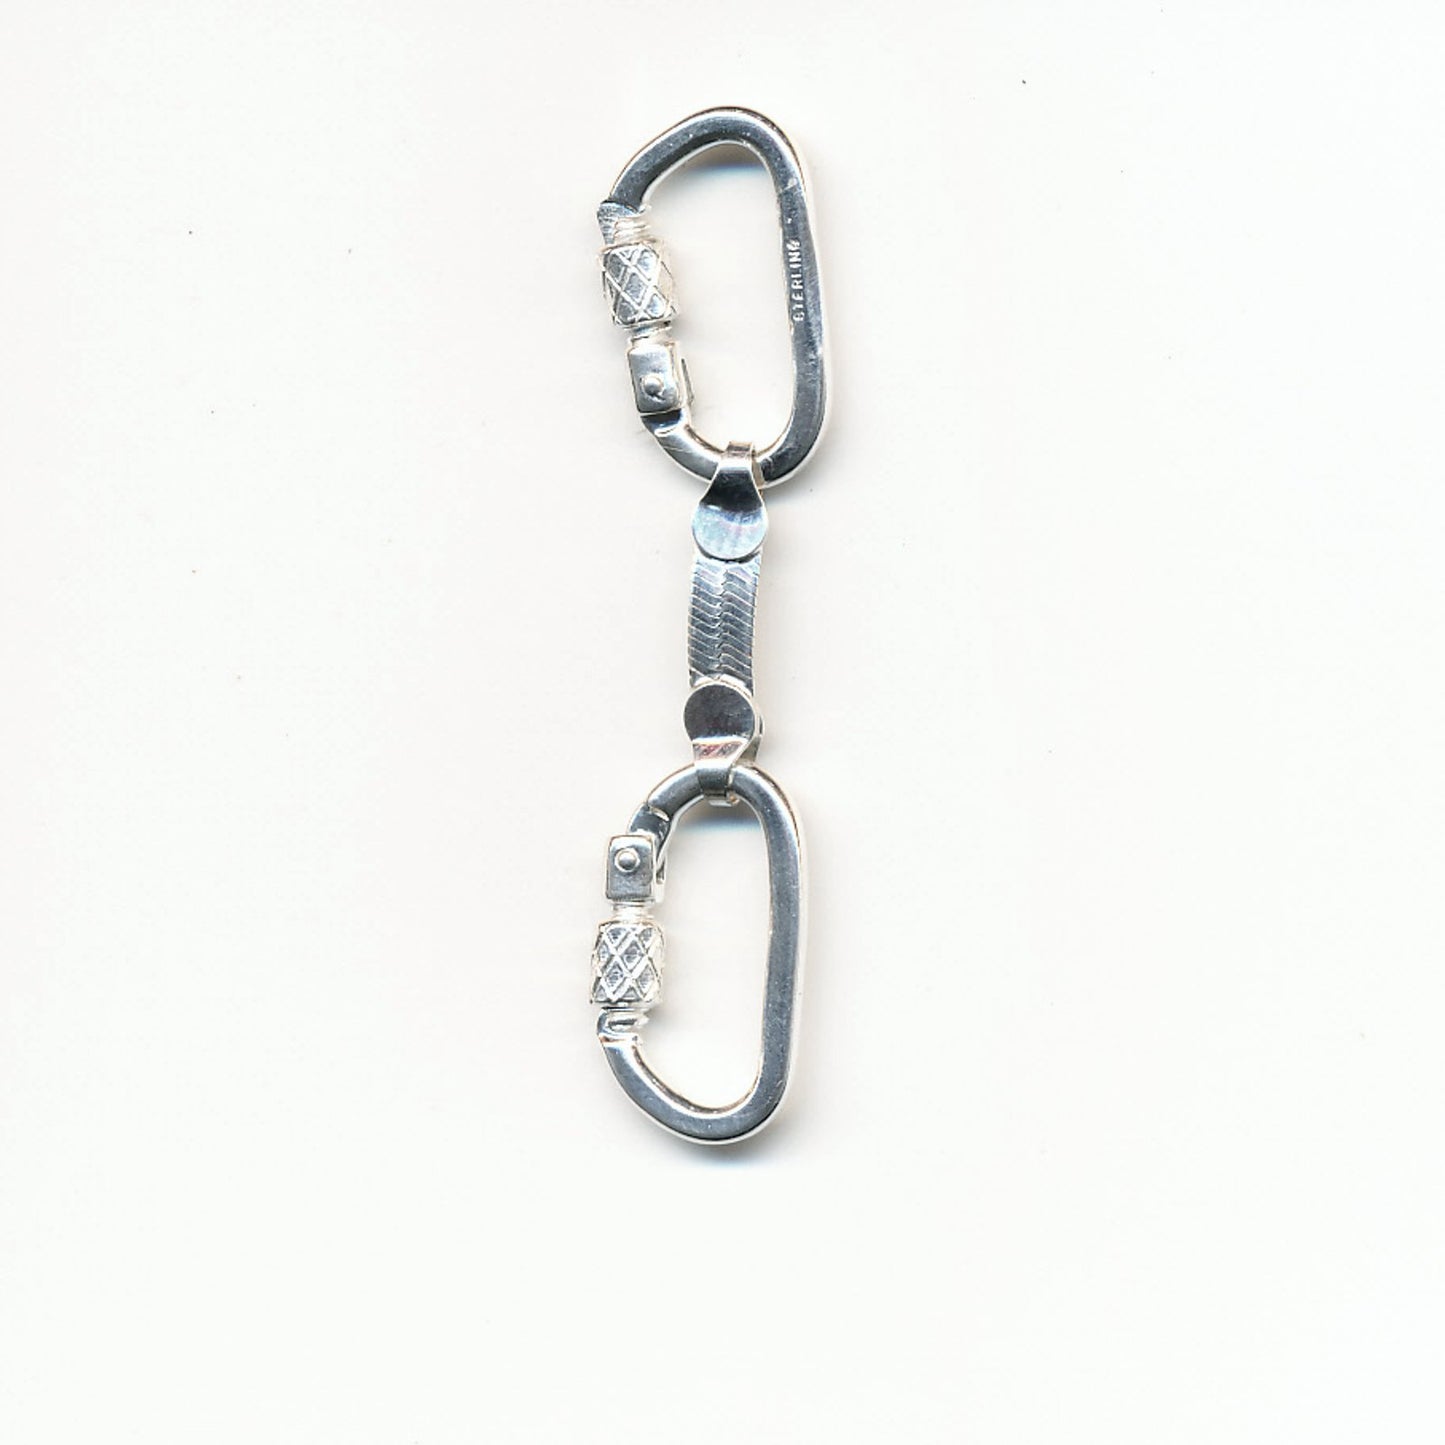 Rock Climbing Miniature Quickdraw - Handmade in sterling silver